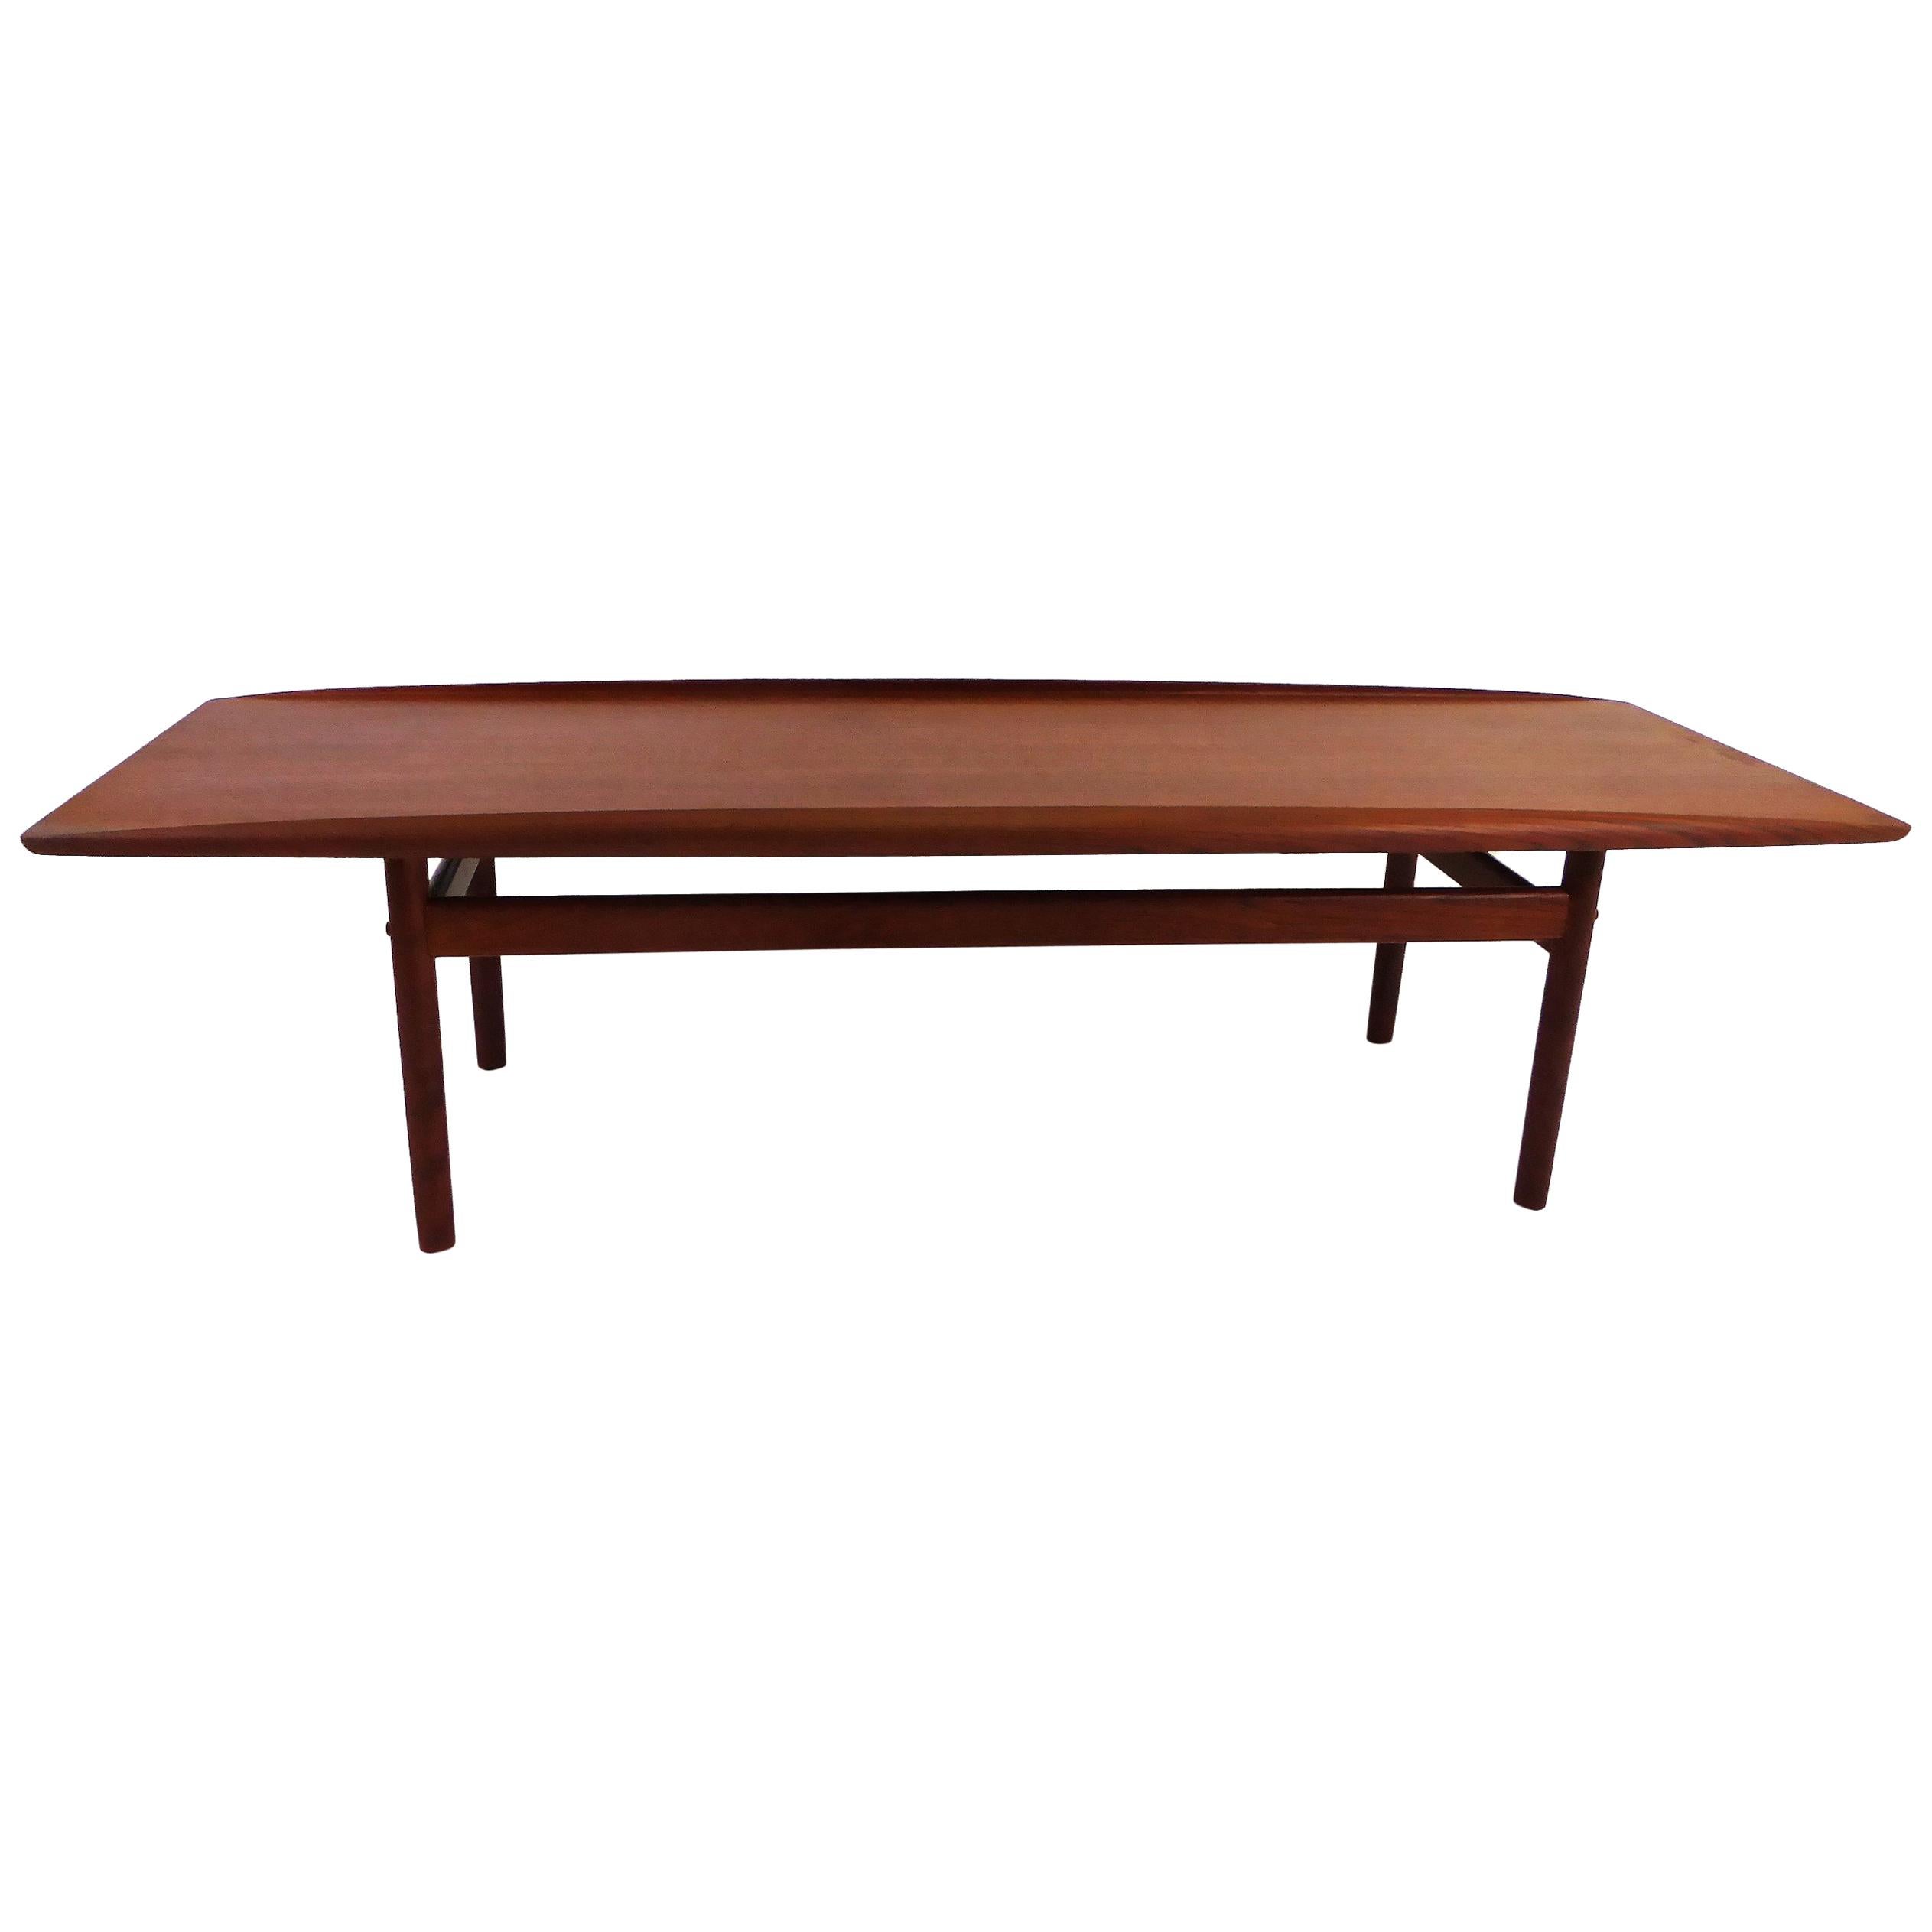 1960s Grete Jalk Surfboard Coffee Table for Poul Jeppesen